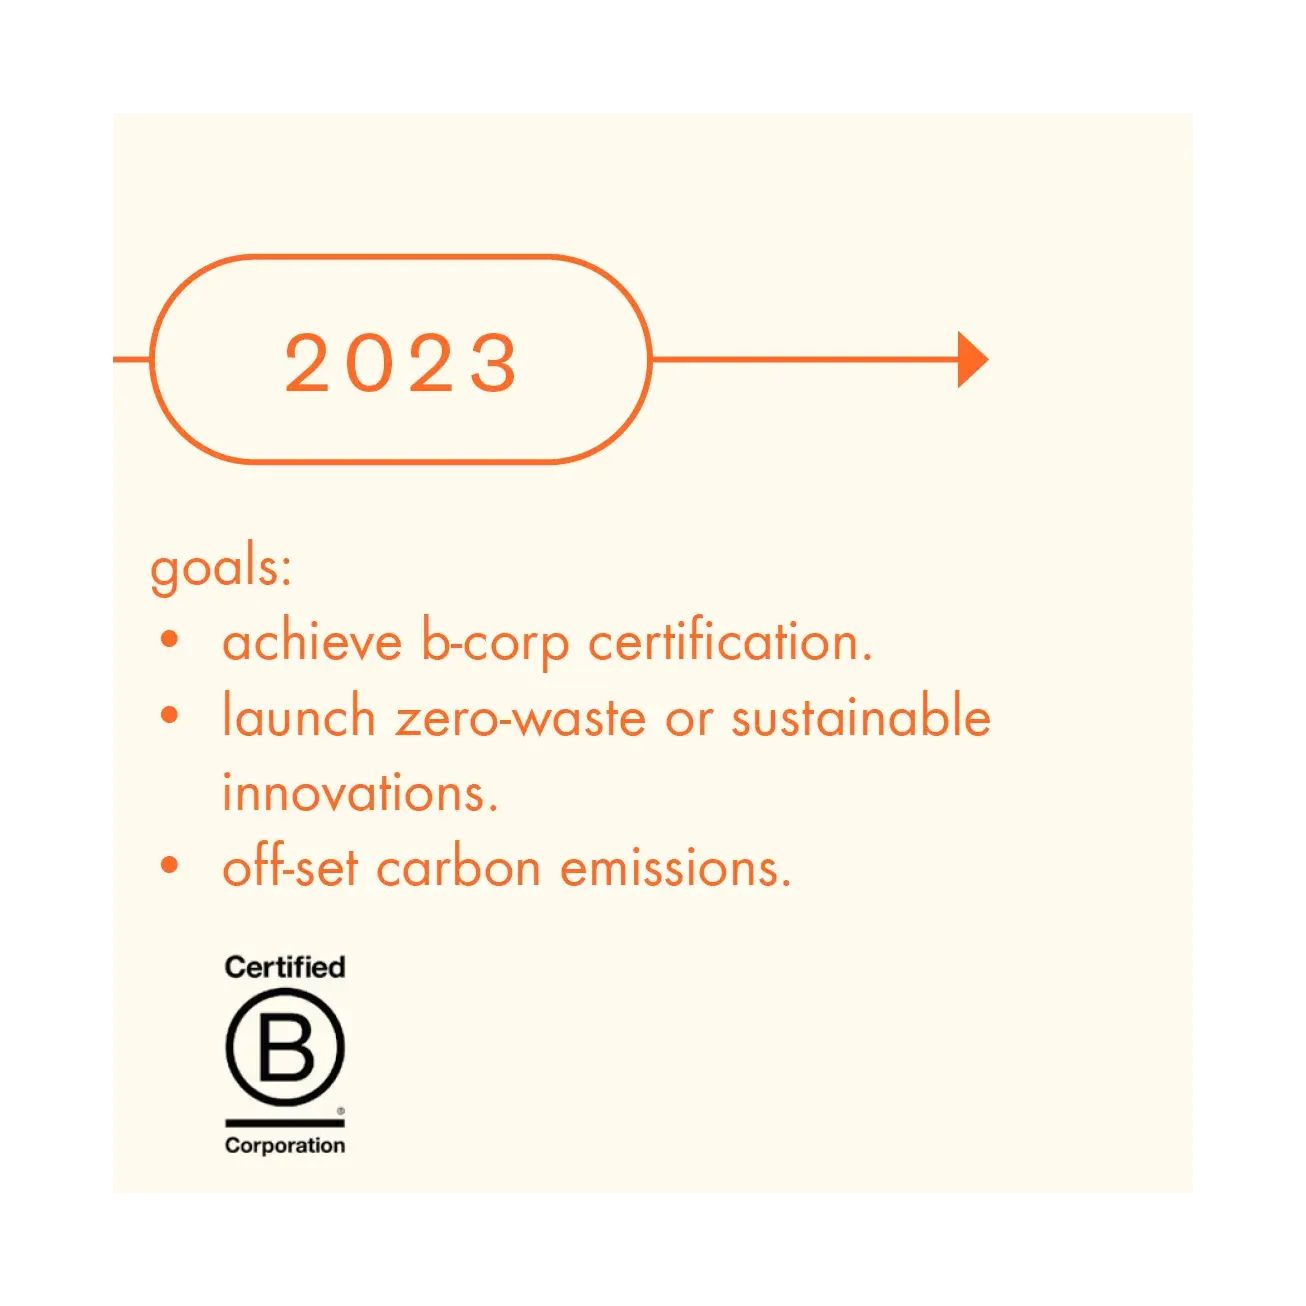 2023 sustainability goals: achieve b-corp certification, launch zero-waste or sustainable innovations, and off-set carbon emissions